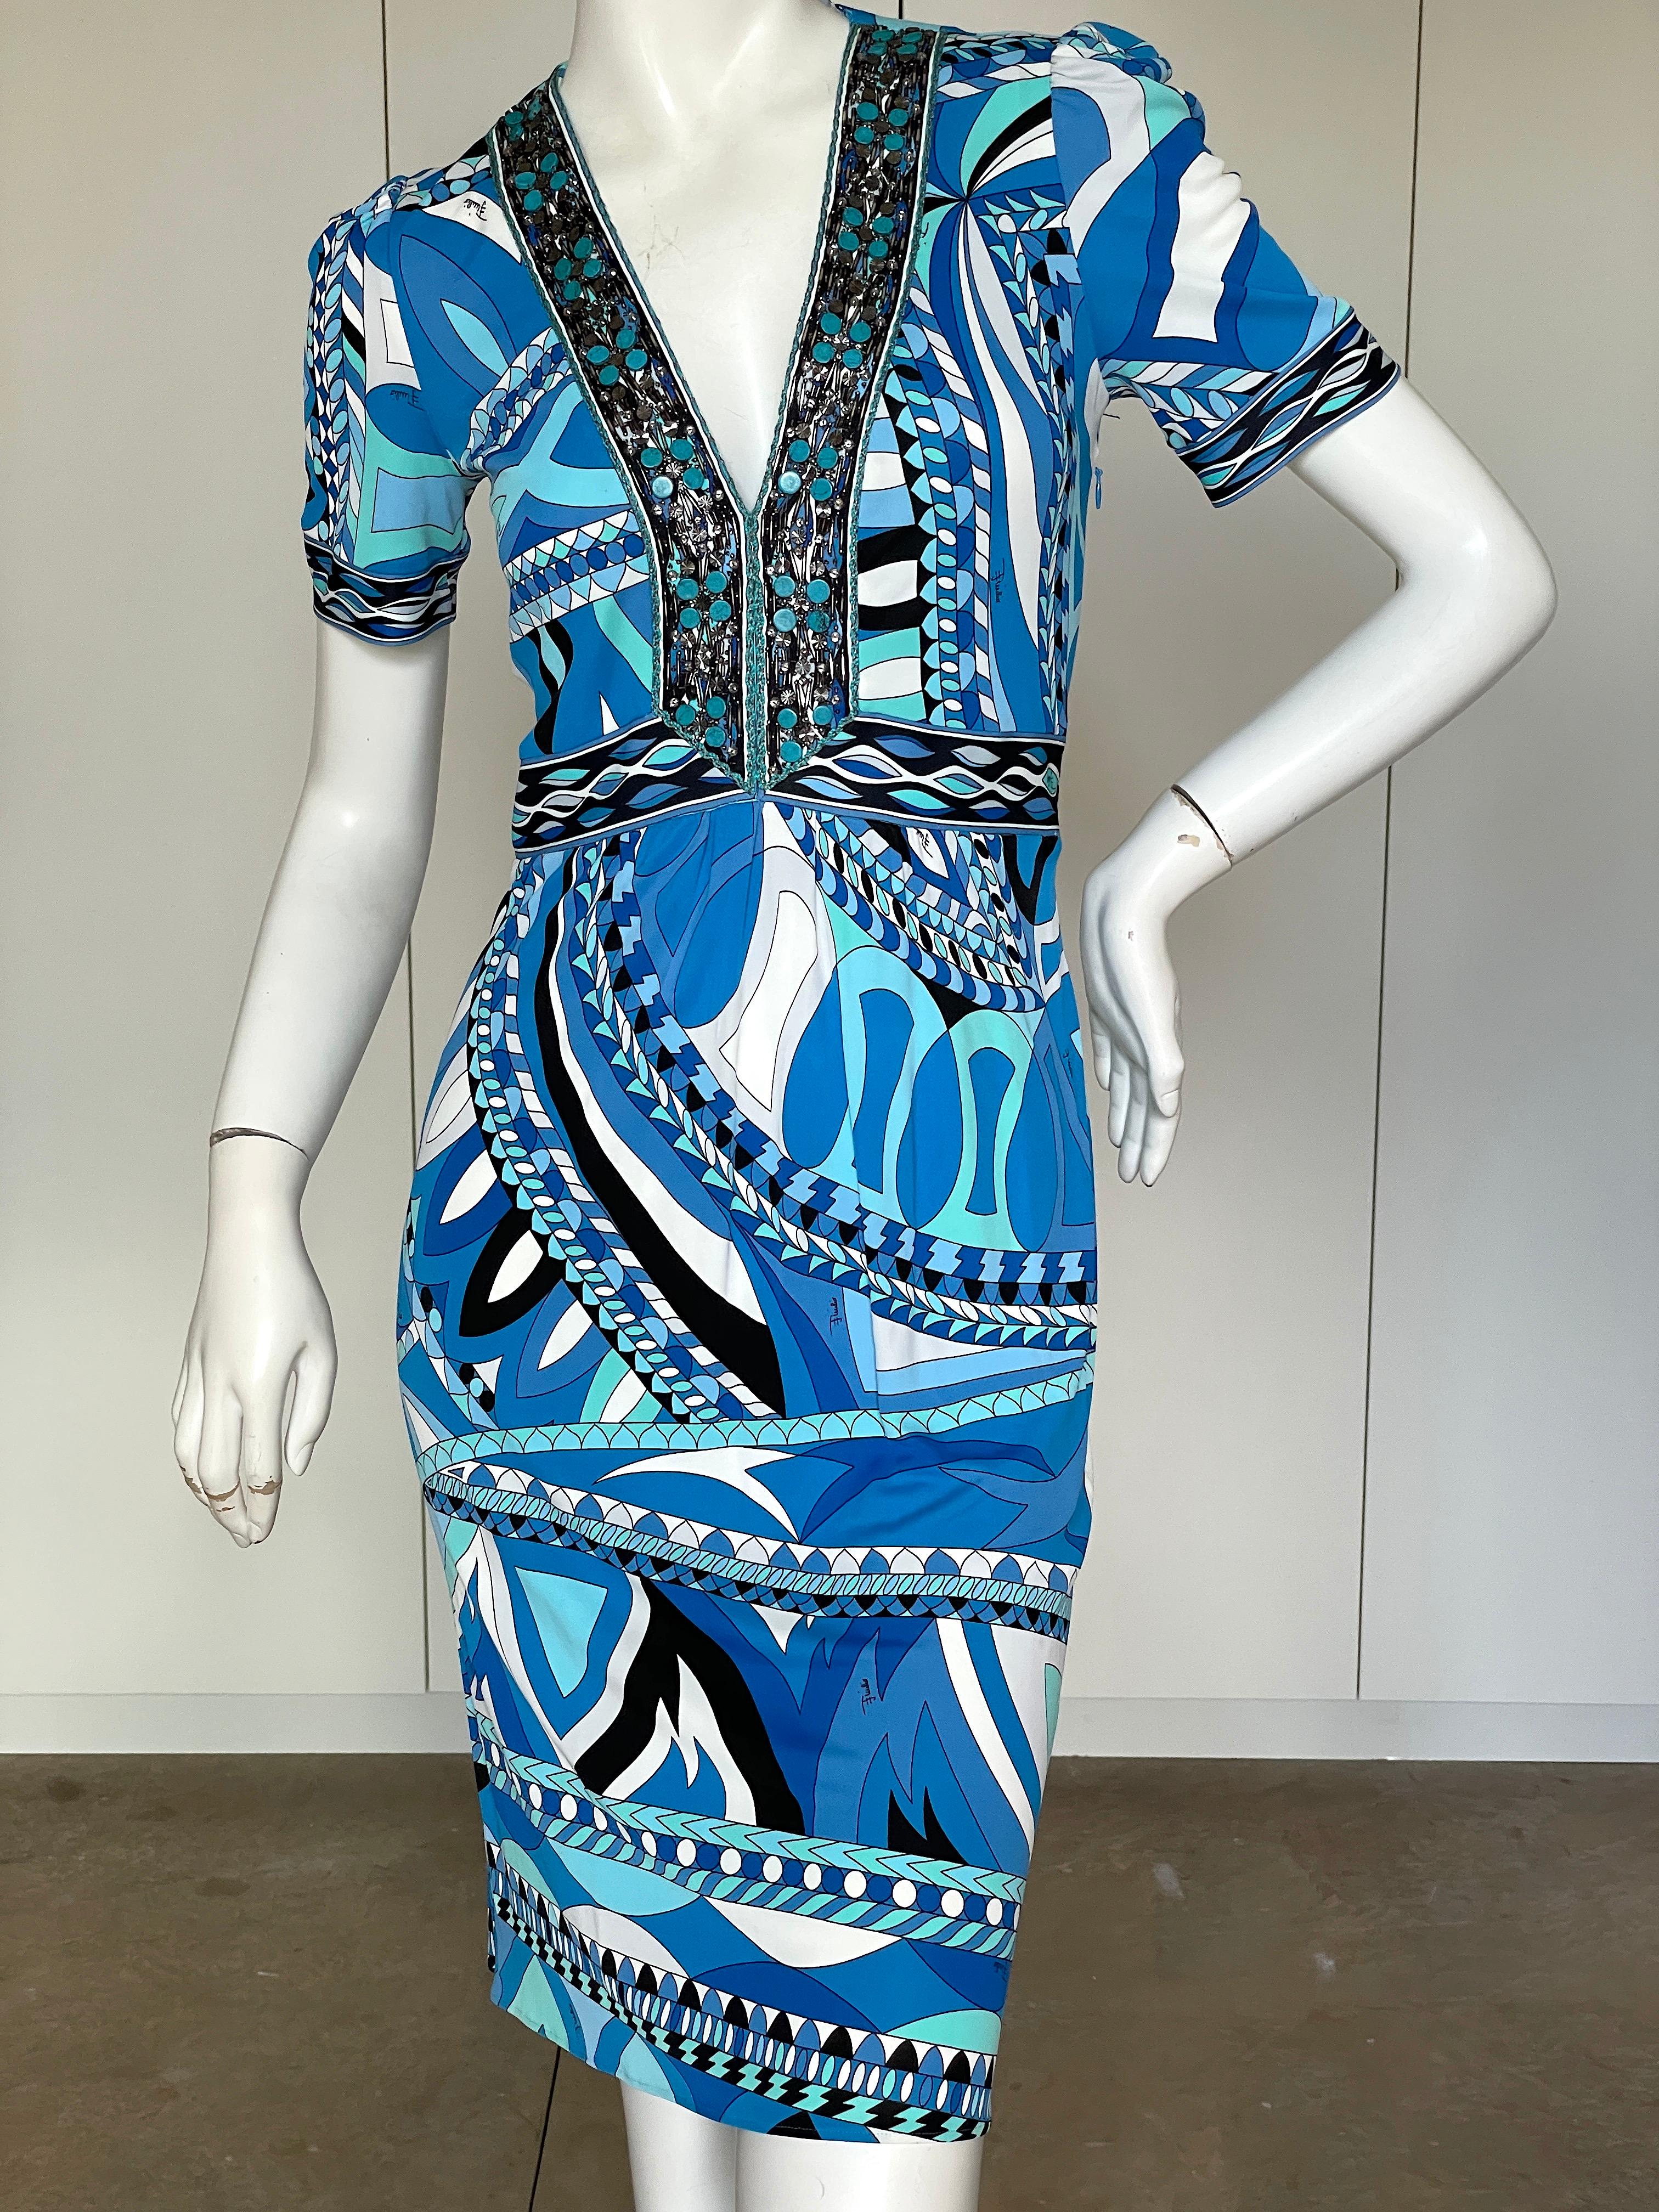 Emilio Pucci Lacroix Era Blue Embellished Cocktail Dress.
  So pretty , please use the zoom feature to see details.
Size 6
Bust 34